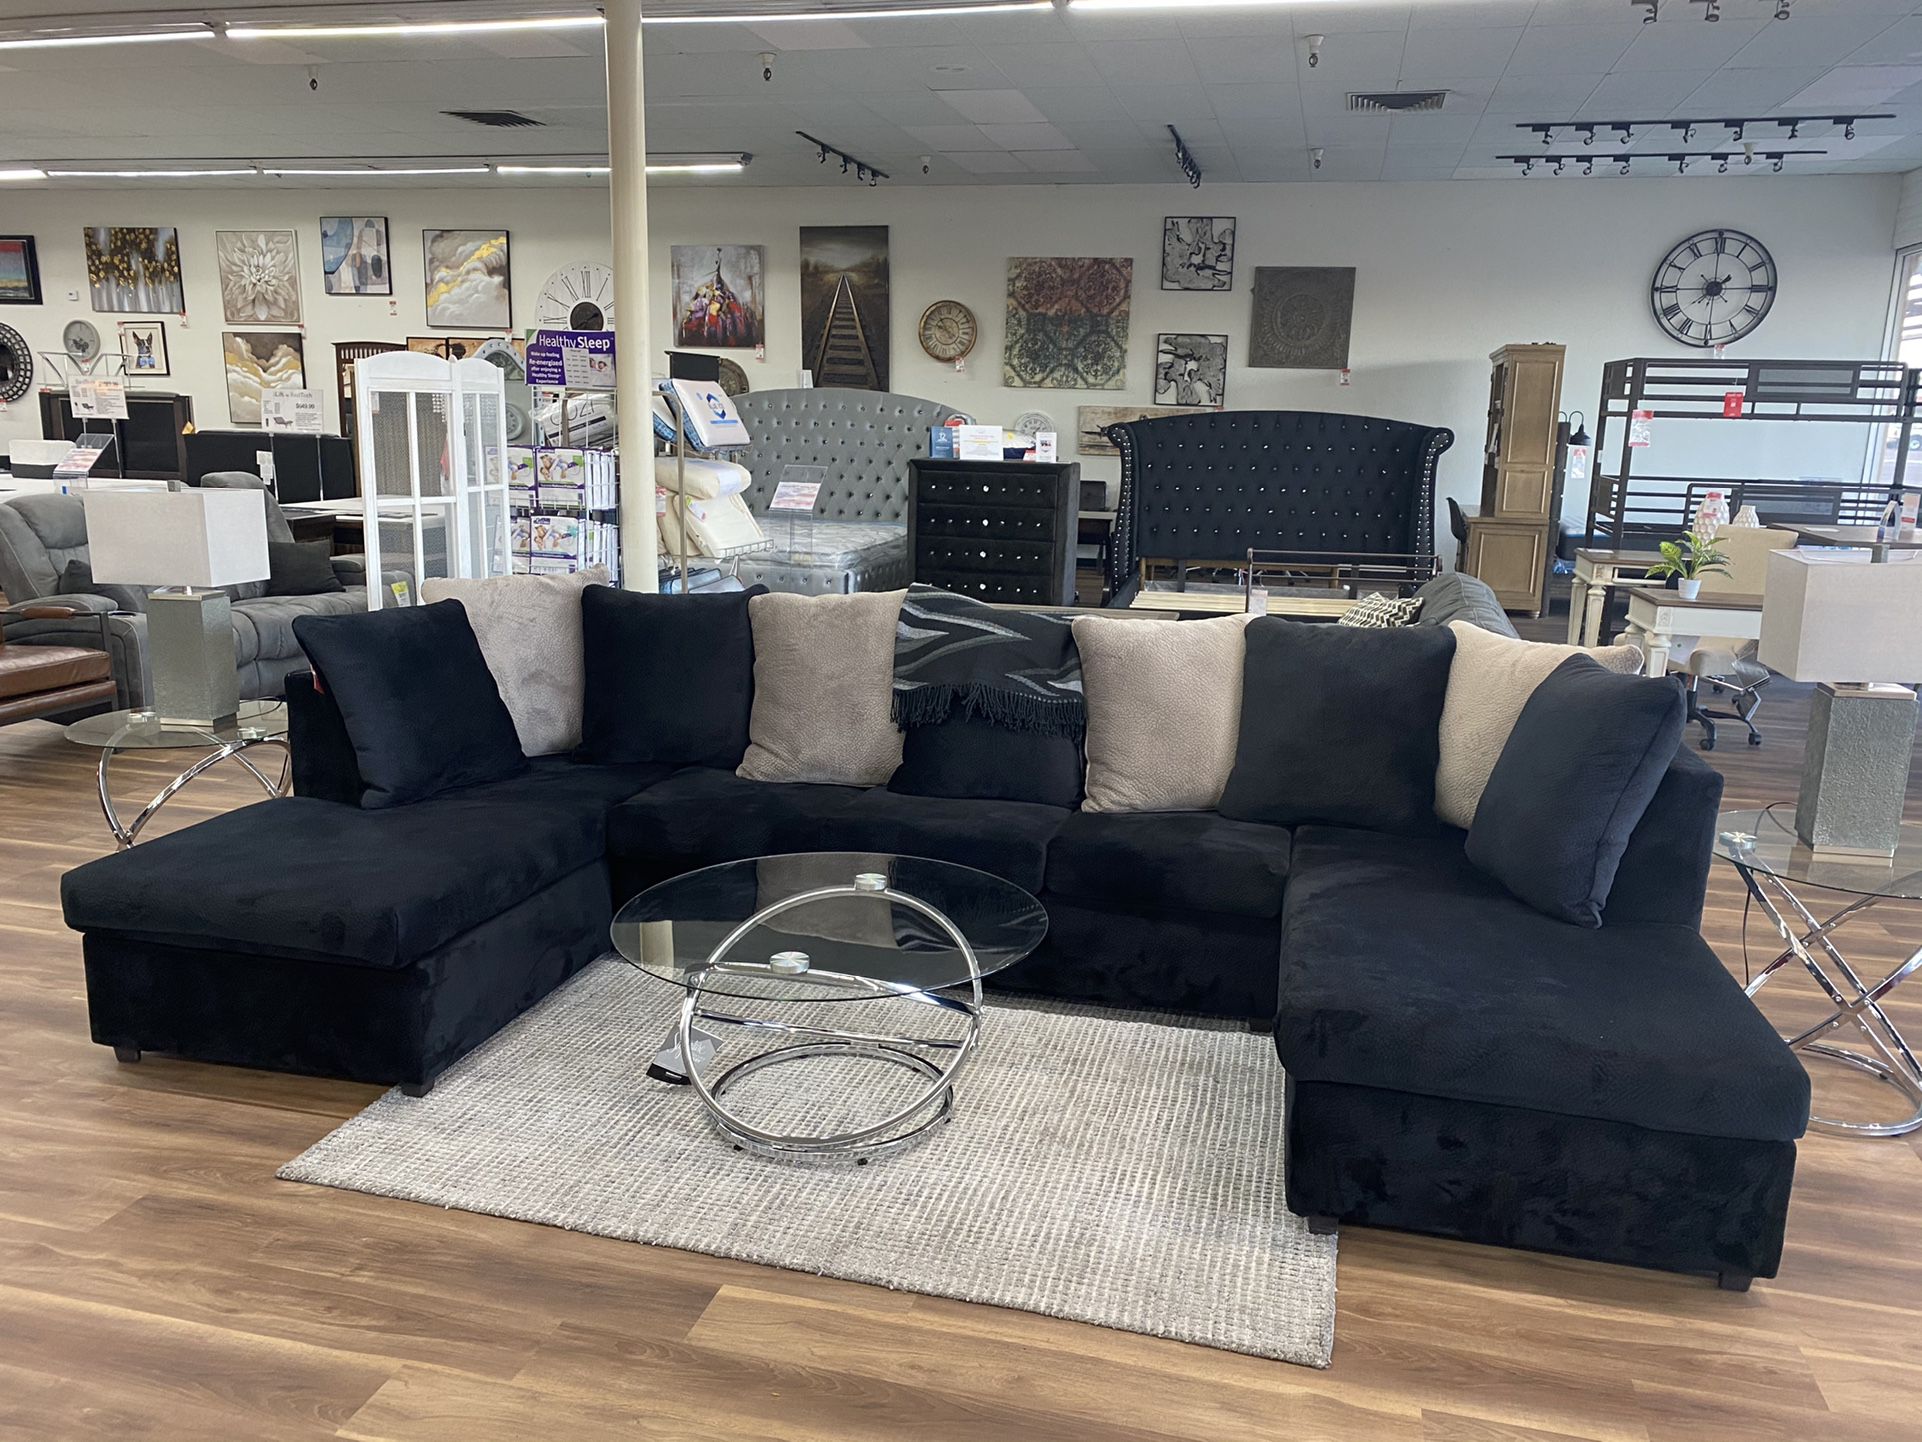 Black And Grey Huge Comfy Sectional Couch 